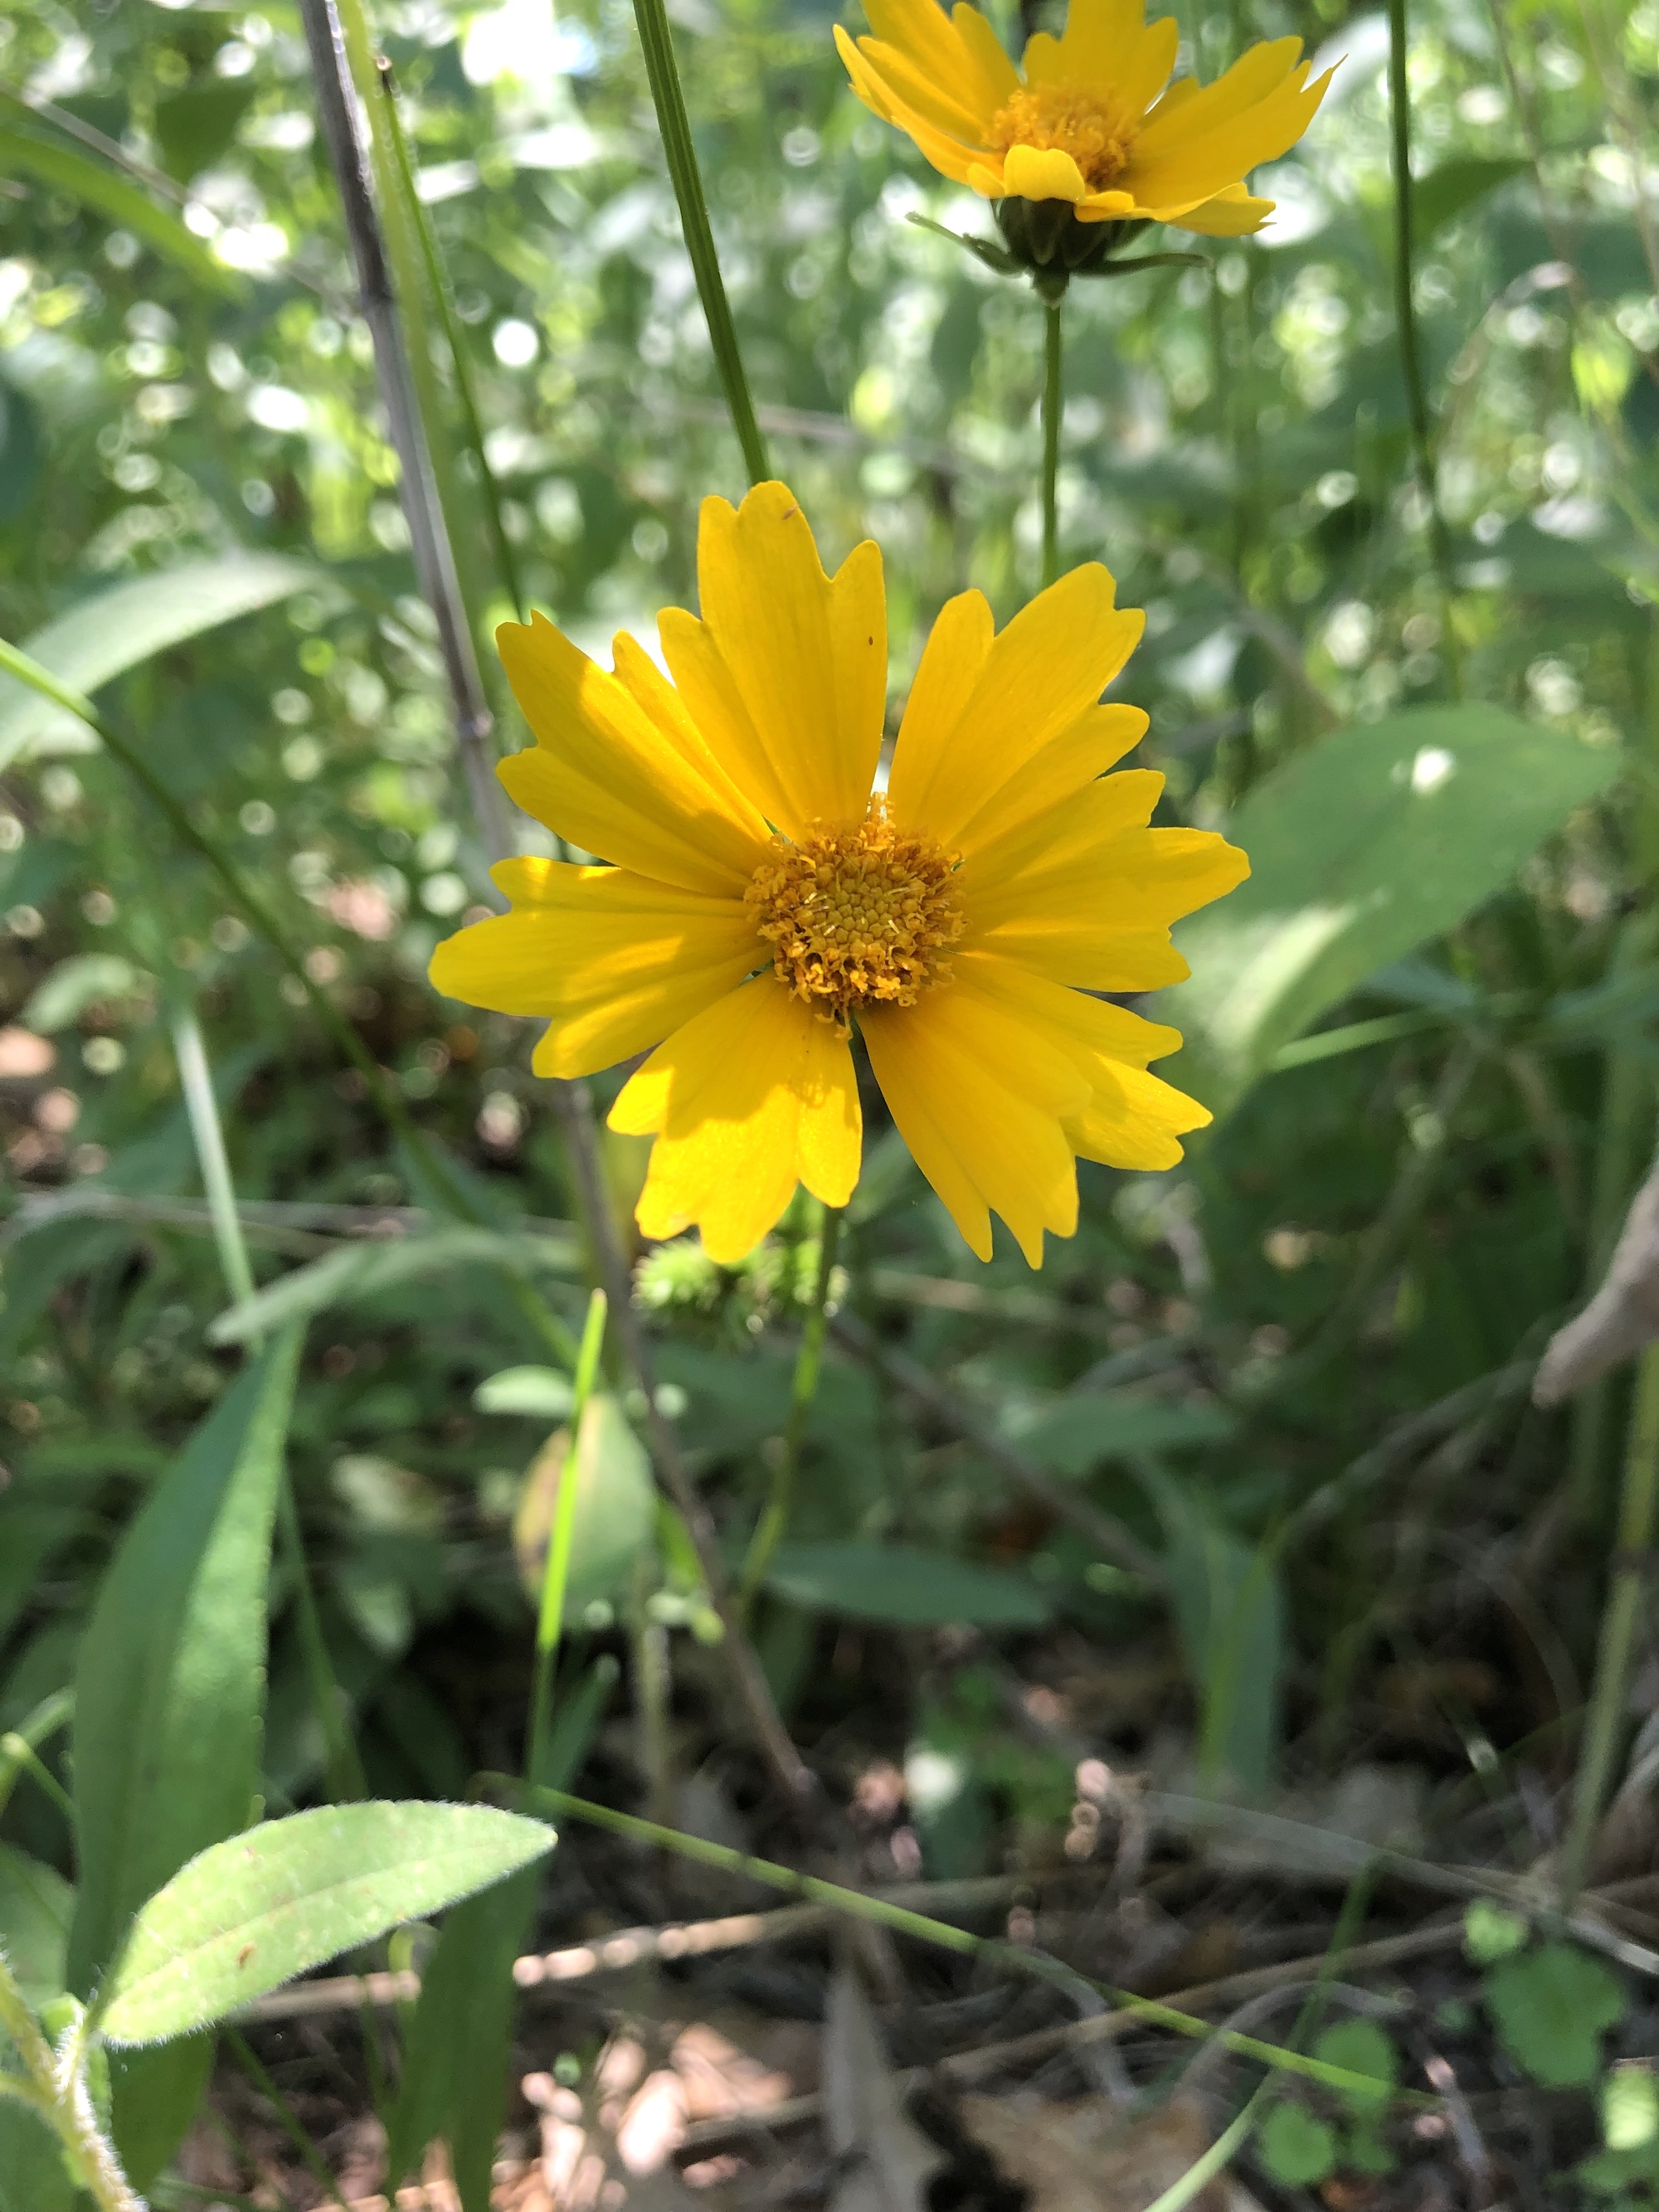 Lance-leaved coreopsis by UW Arbortetum Visitors Center in Madison, Wisconsin on June 20, 2022.